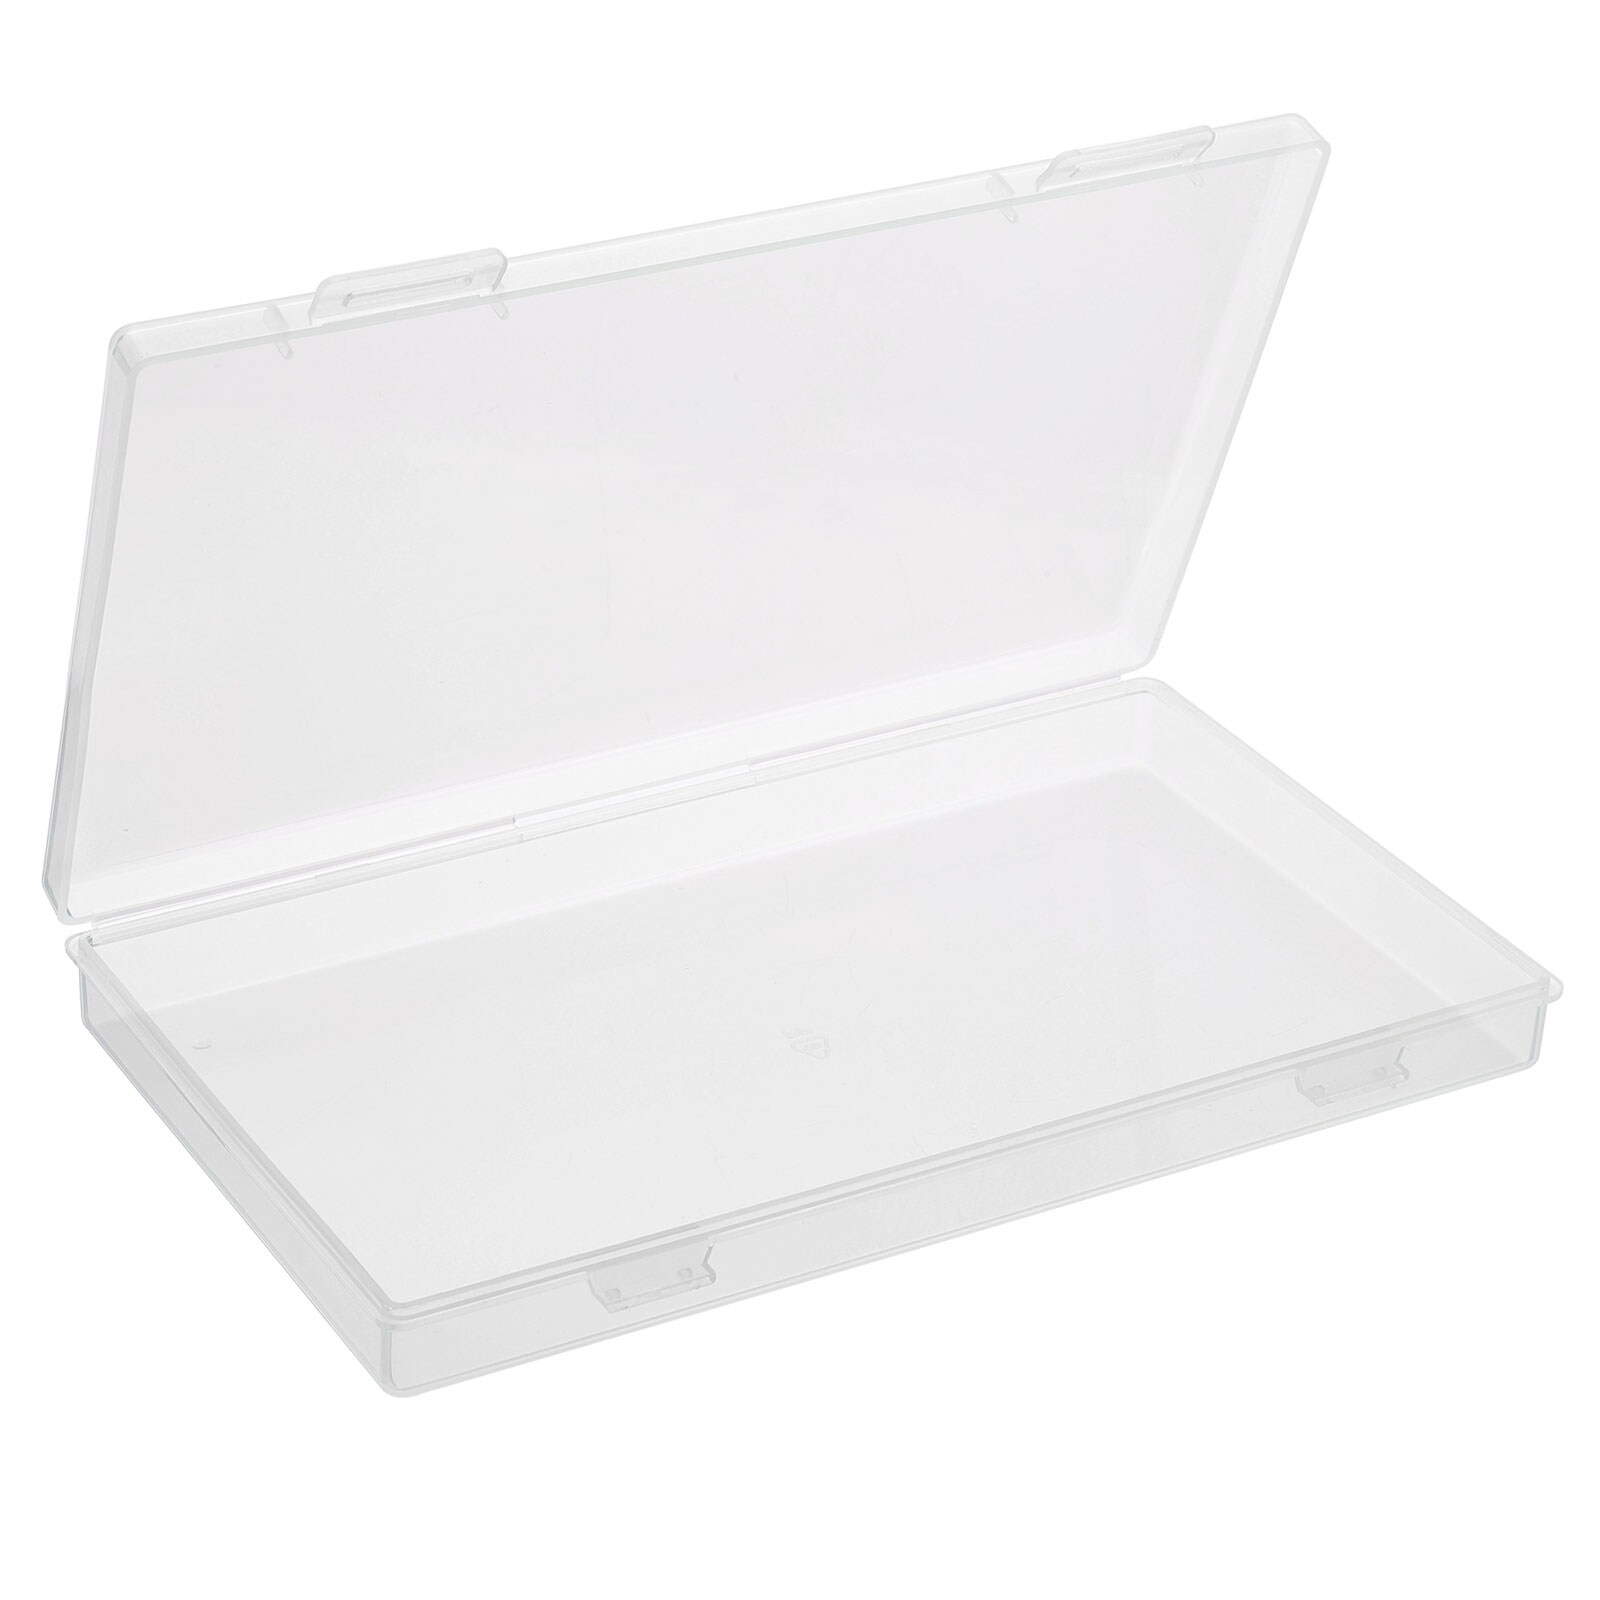 https://ak1.ostkcdn.com/images/products/is/images/direct/0c83c3302d925cdbe37a27e0c73b2ff7409f0ed7/2pcs-Clear-Storage-Container-w-Hinged-Lid-195x115x24mm-Plastic-Rectangular-Box.jpg